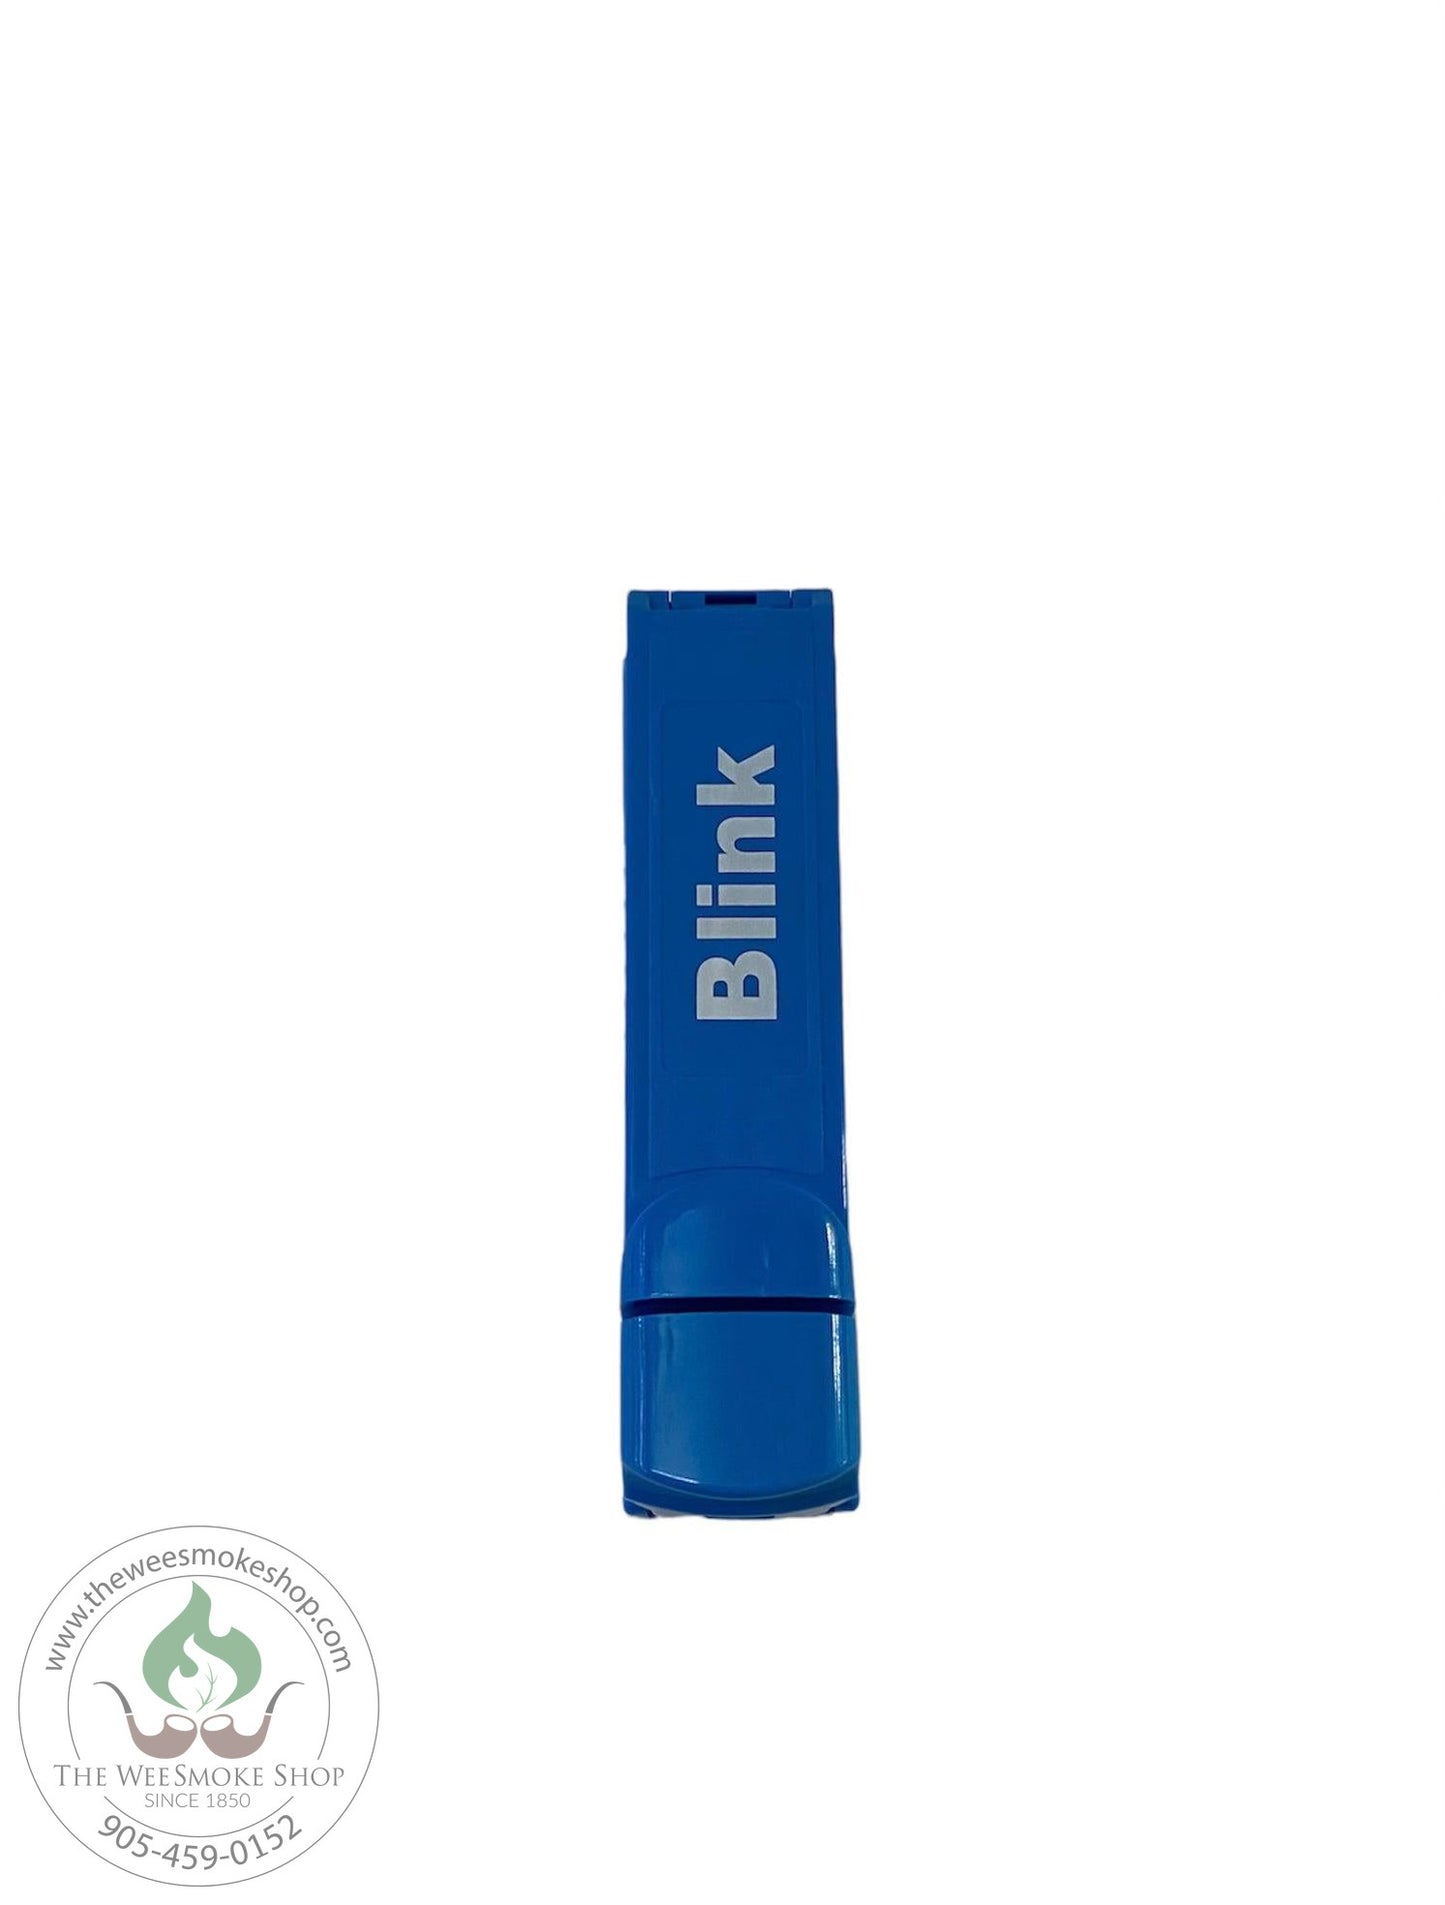 Blink Cigarette Rolling Machine - roll your own - the wee smoke shop